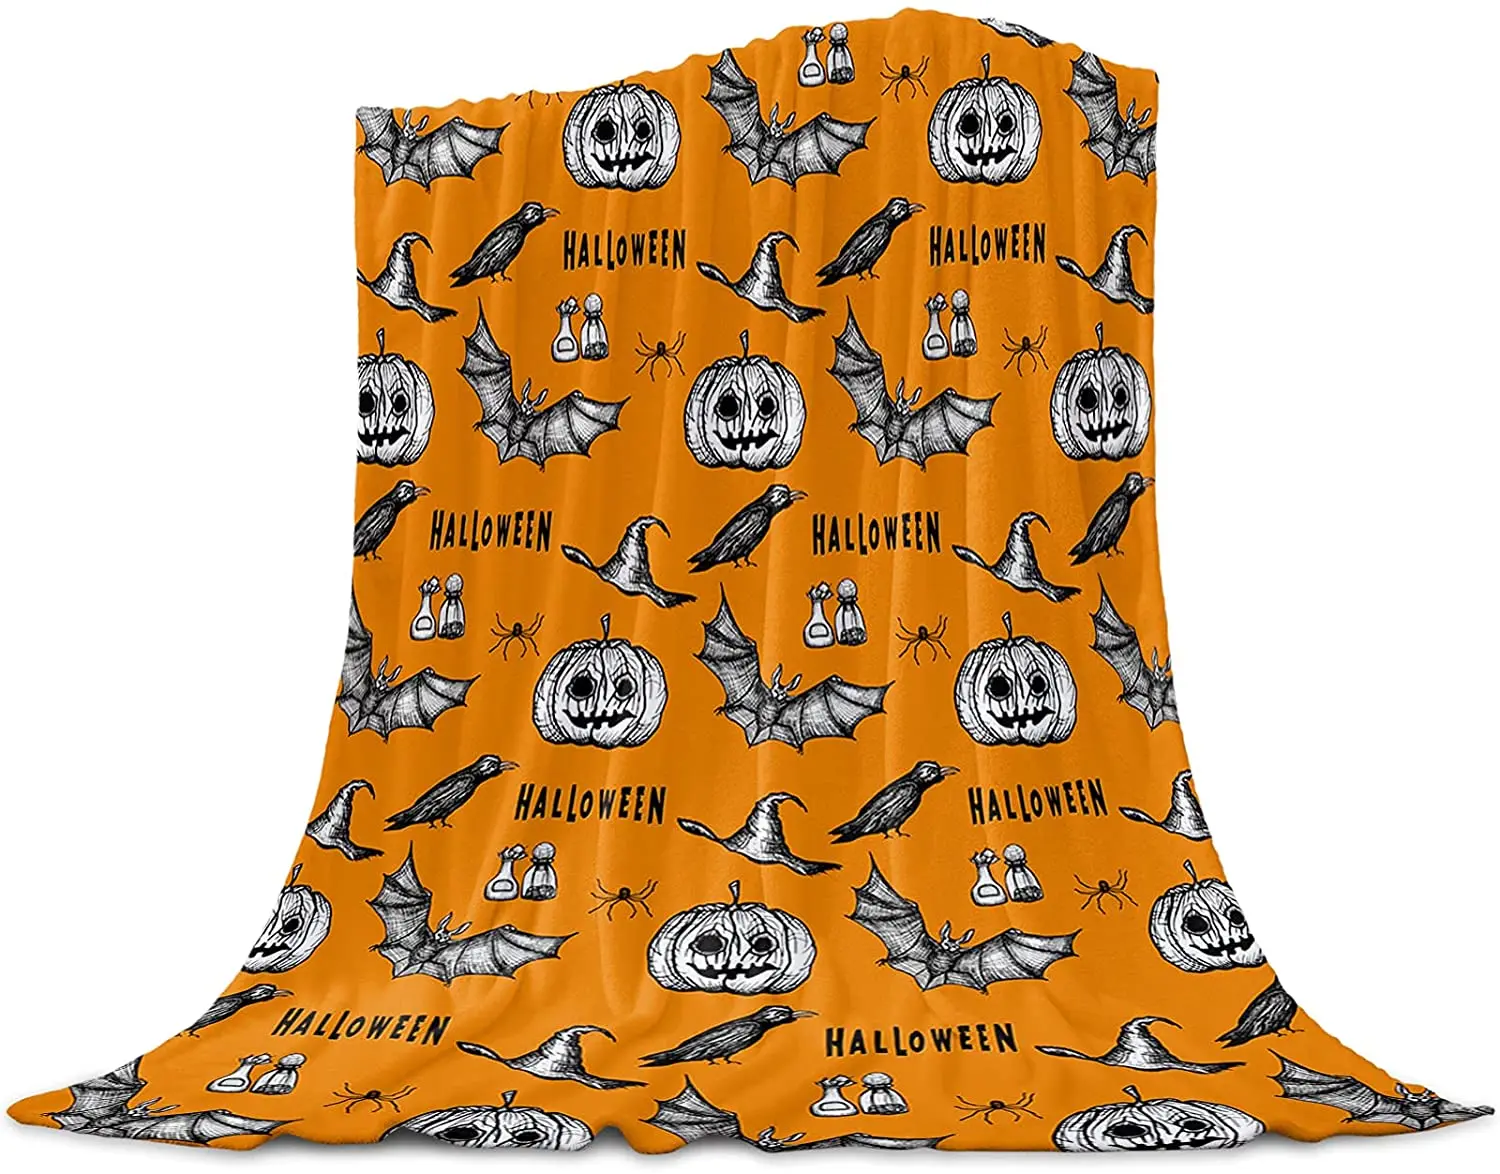 

Flannel Blankets and Throws for Couch Bed, Super Soft Cozy Lightweight Plush Throw Blanket,Halloween Bat Scary Pumpkin